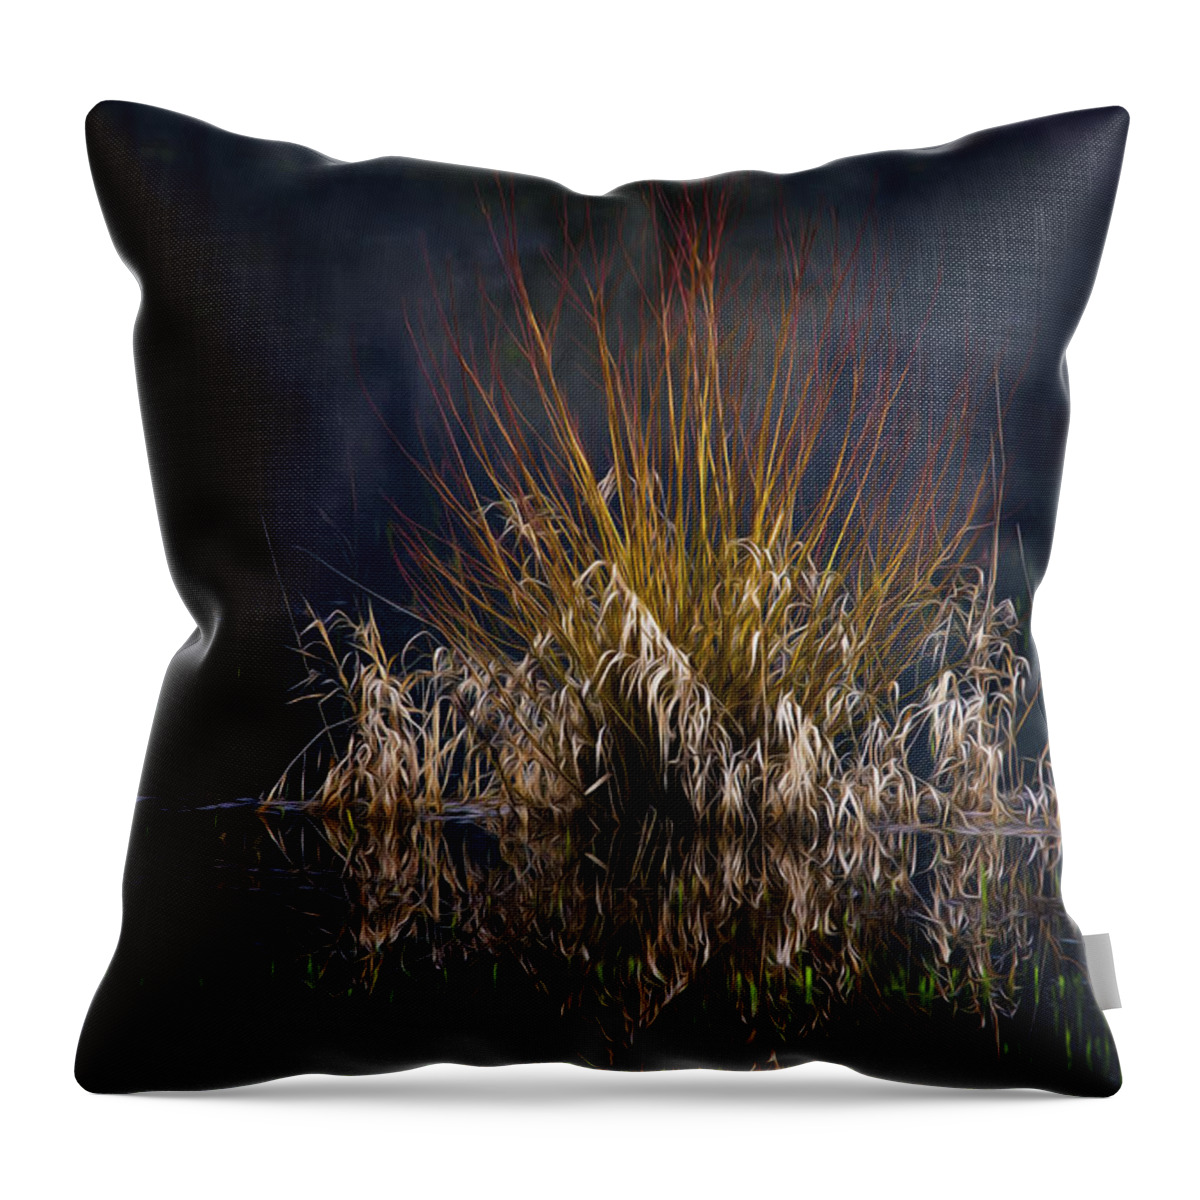 Grasses Throw Pillow featuring the photograph Swamp Thing by John Christopher